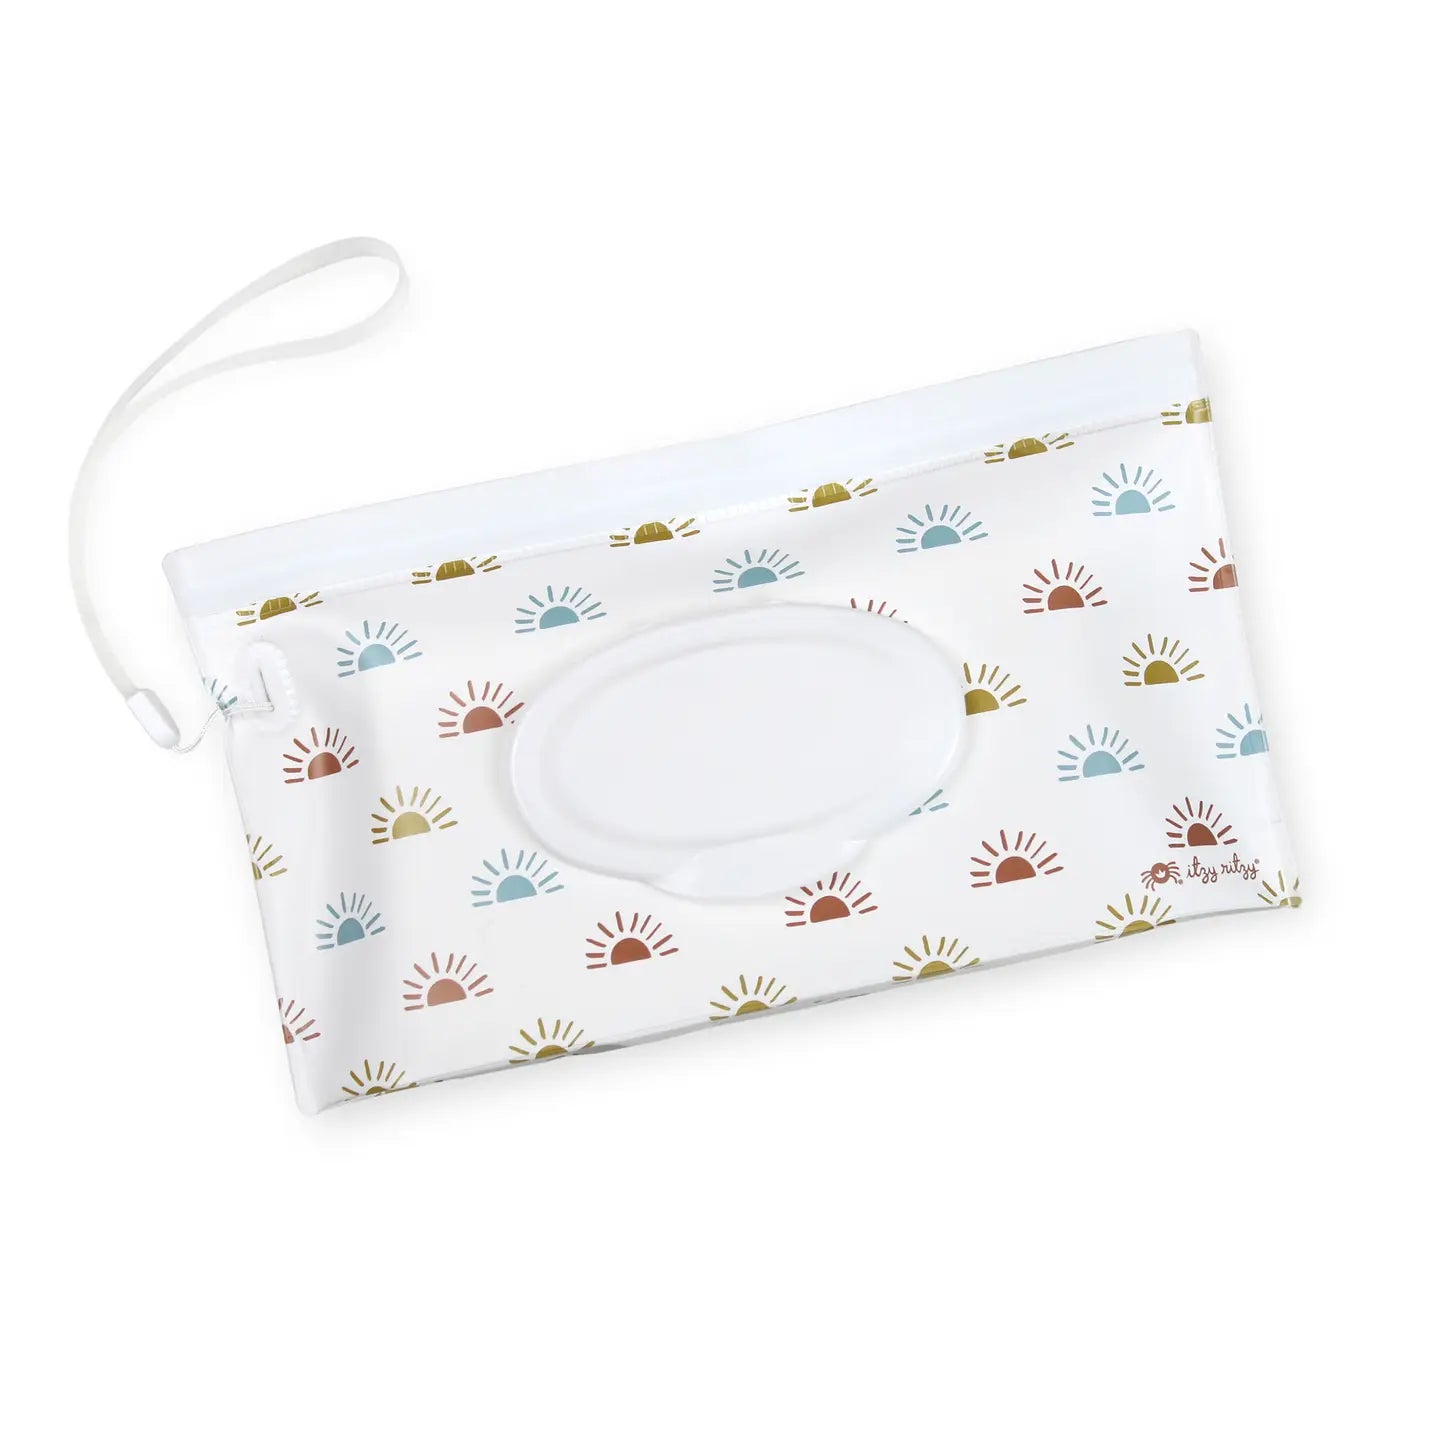 Take & Travel Wipes Pouch